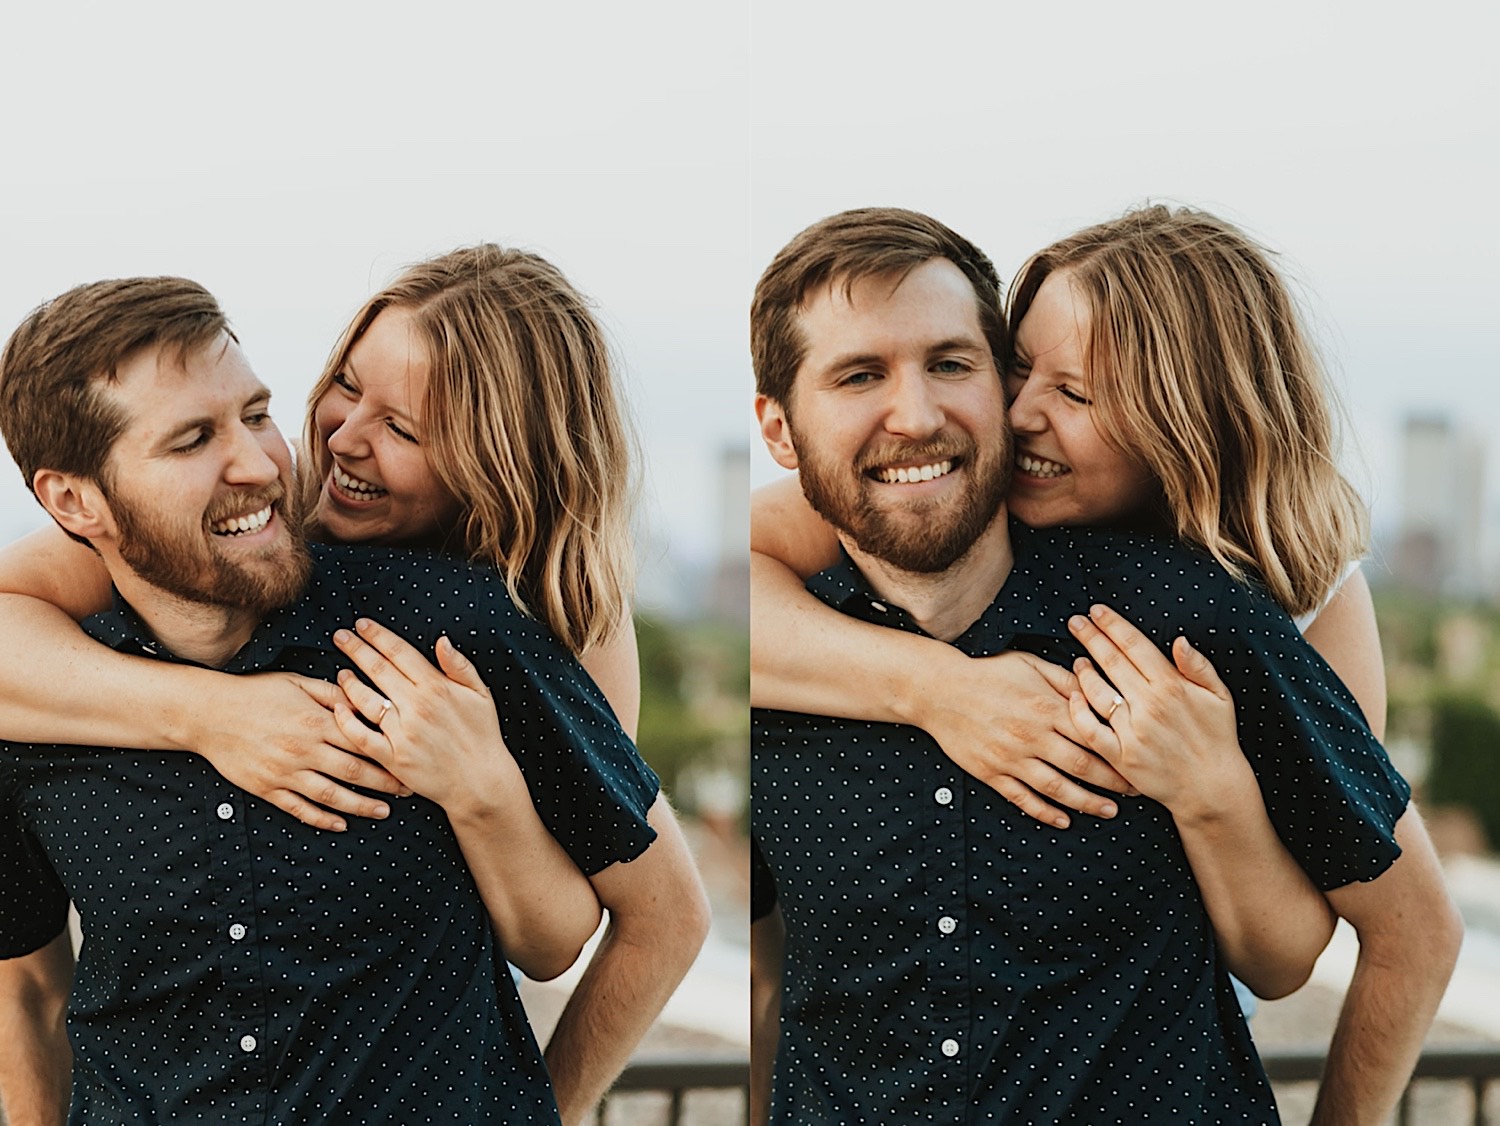 2 photos side by side of a man with a woman riding piggy back as the two smile at one another